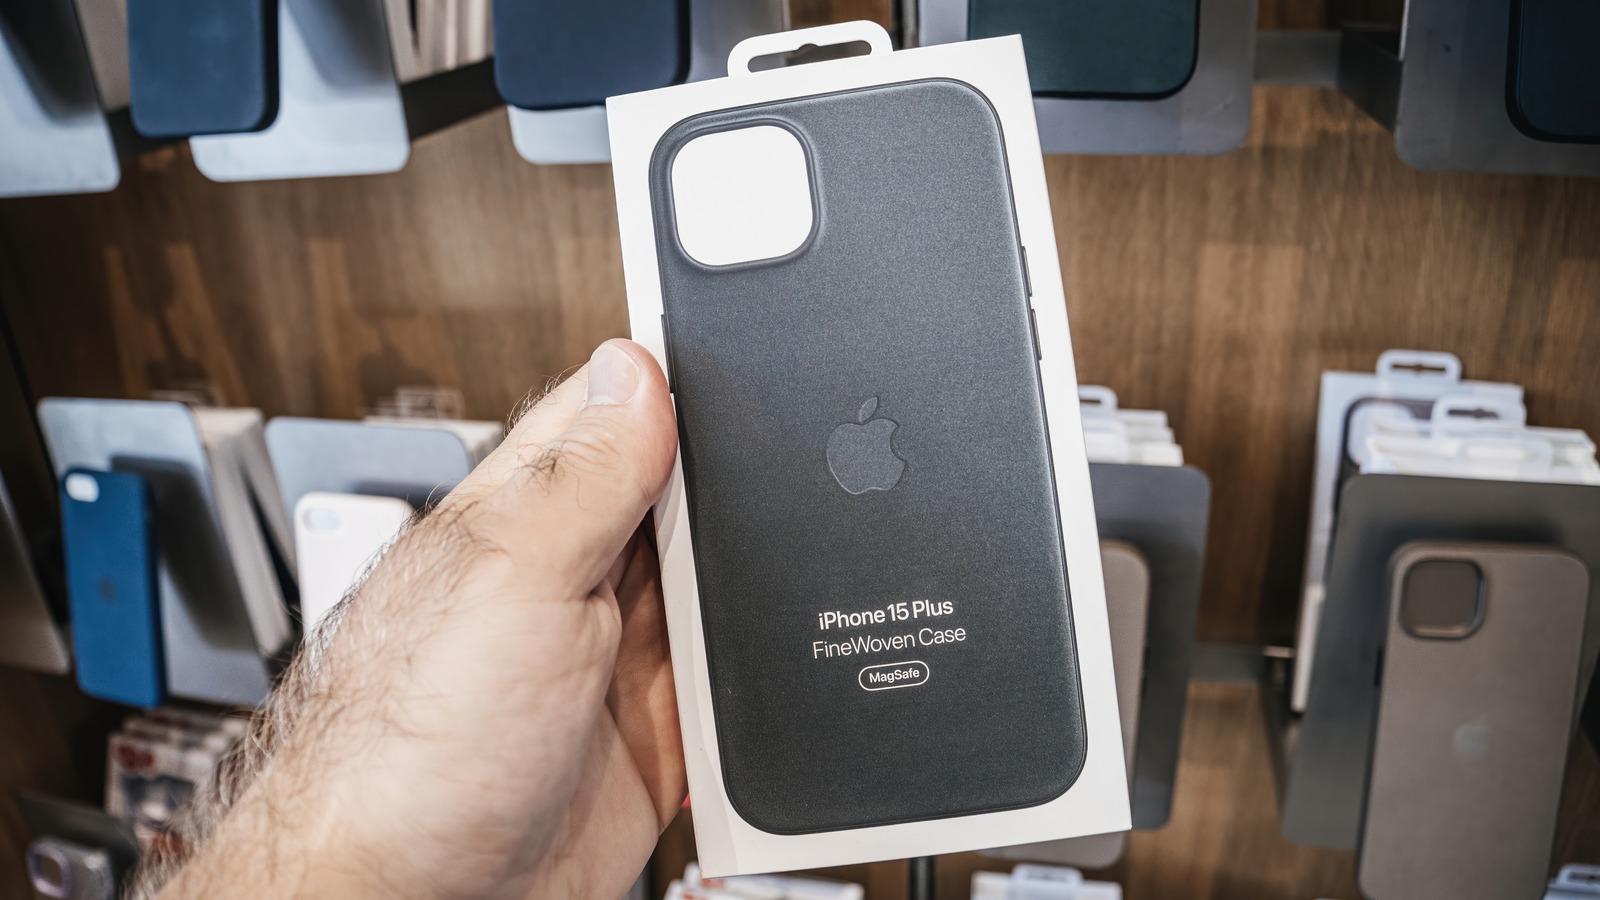 Why You Should Think Twice Before Buying Apple's FineWoven Cases